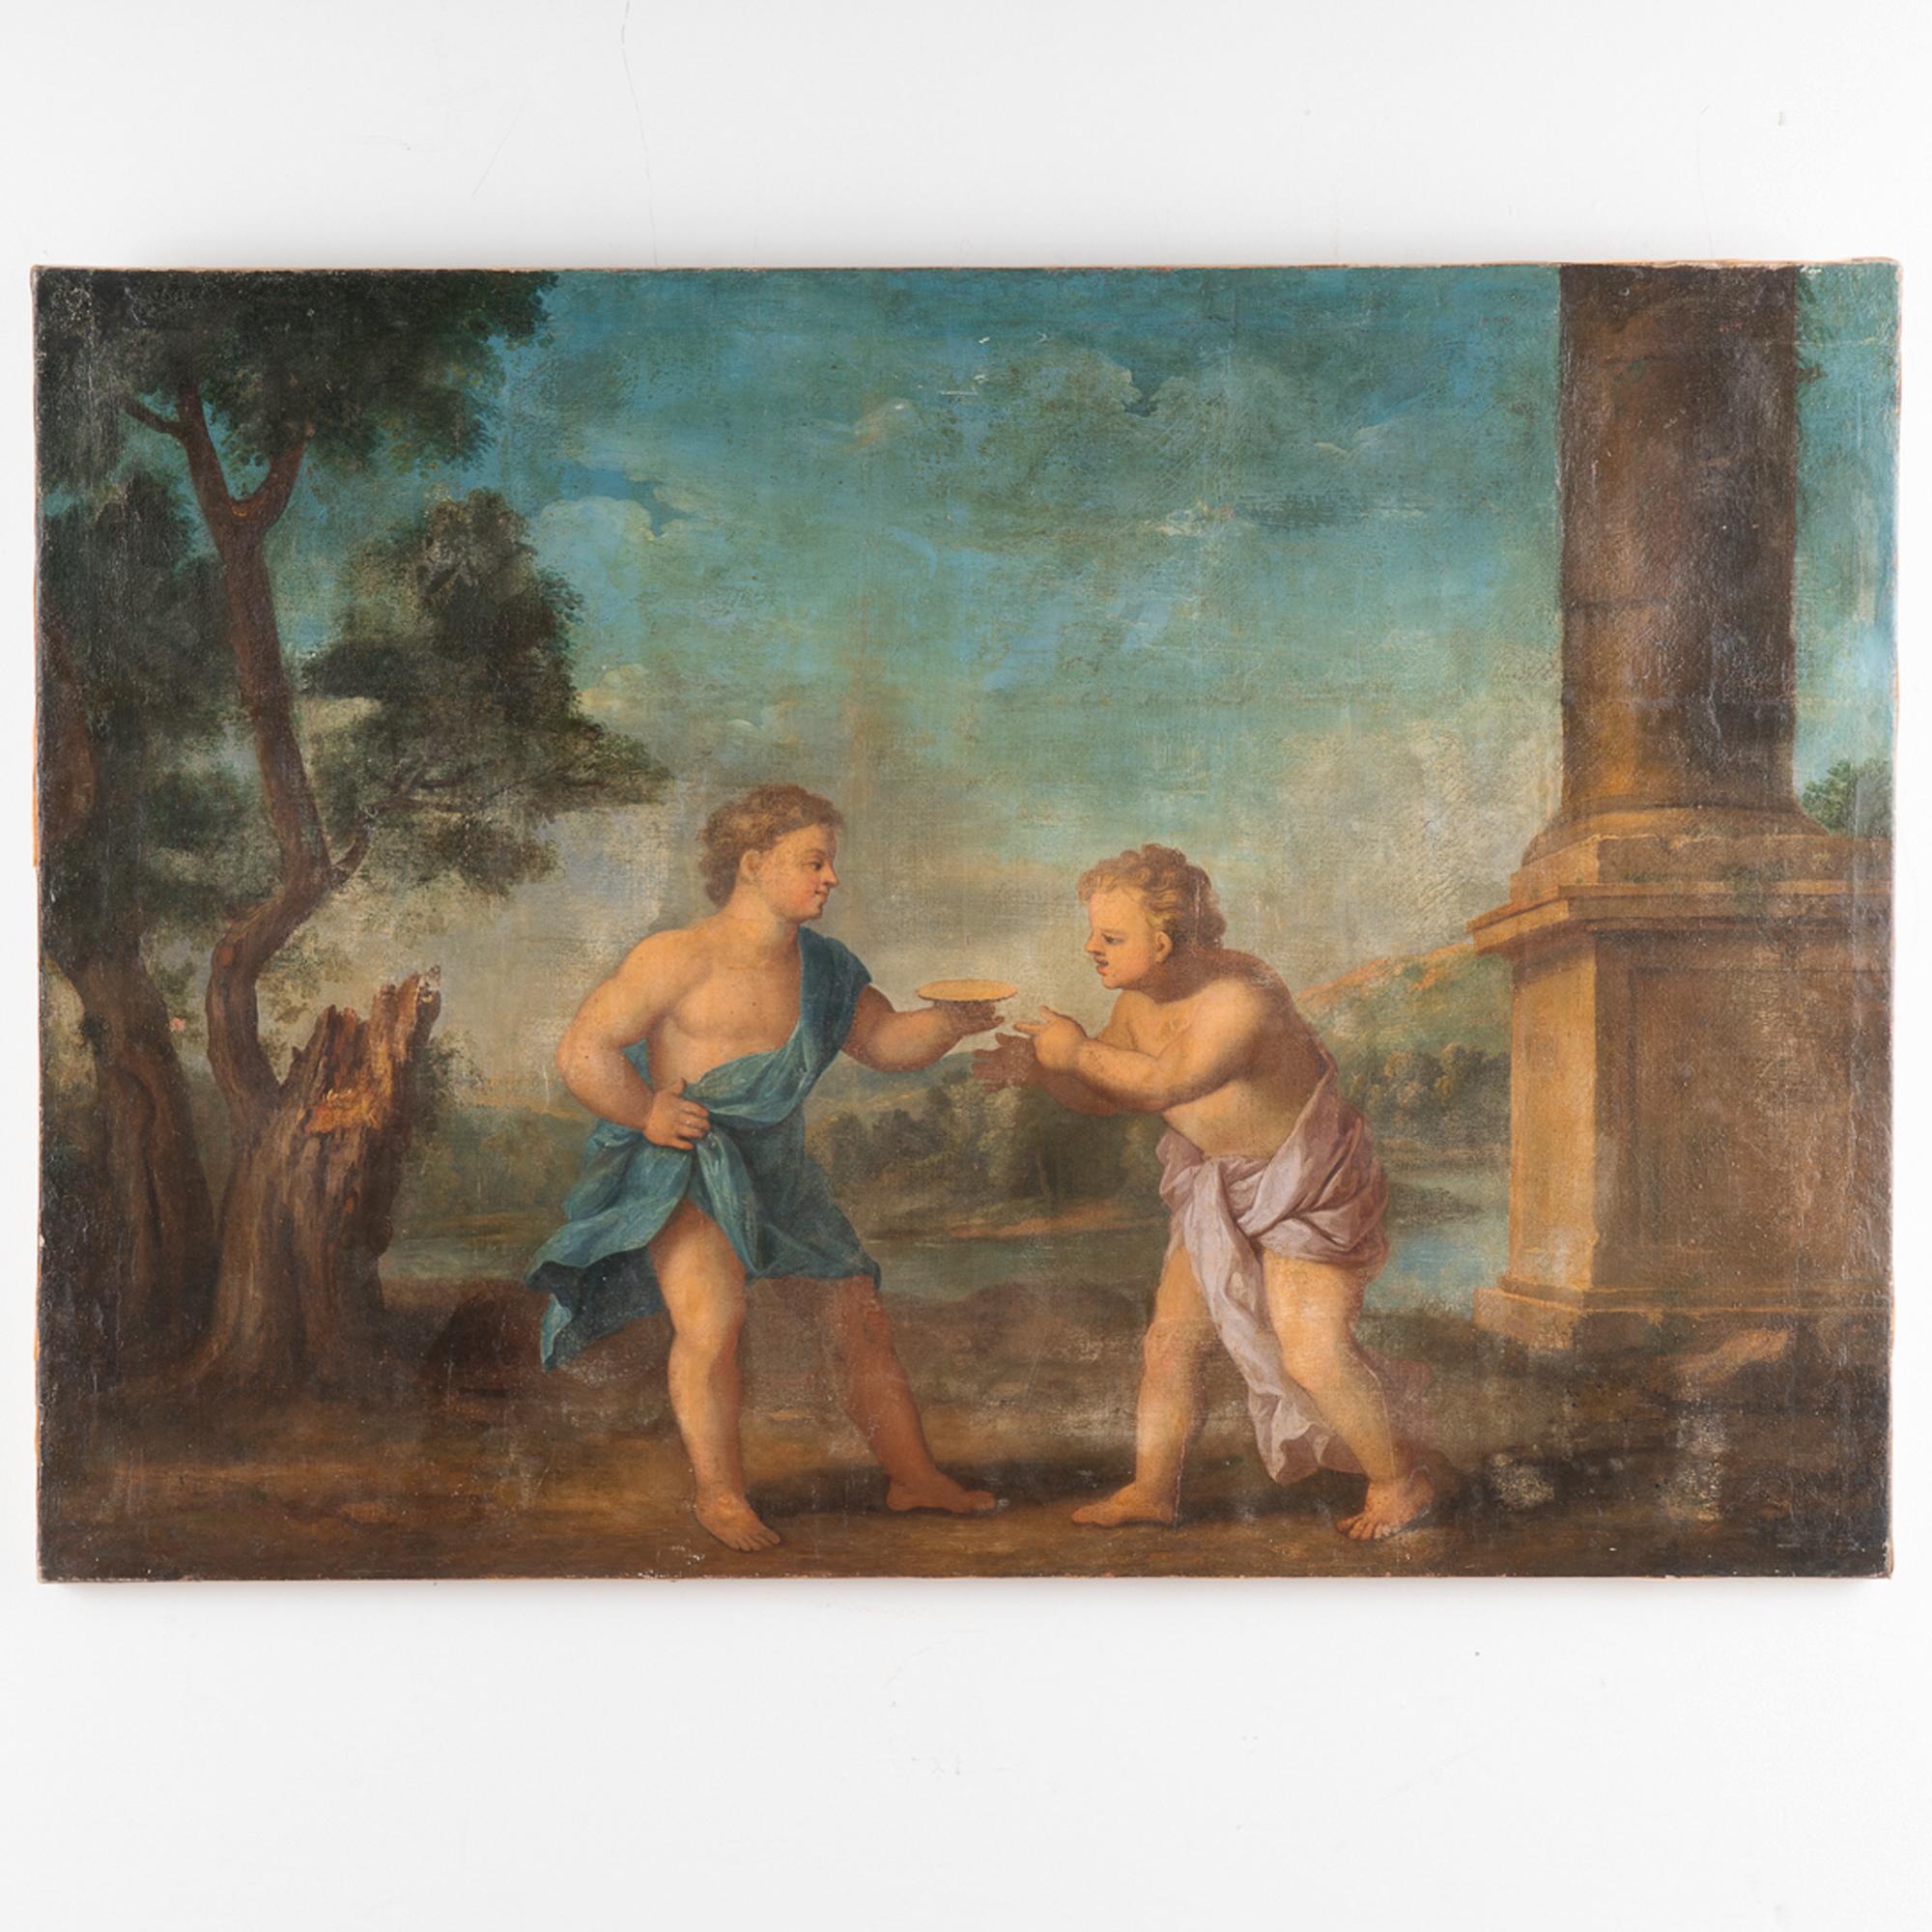 The colors remain vivid in this original oil on canvas painting of allegorical scene, Italian School, circa 1800.
Condition: Age related craquelure and peelings throughout, hole (between trees), old repairs. Remains of red paper (perhaps from